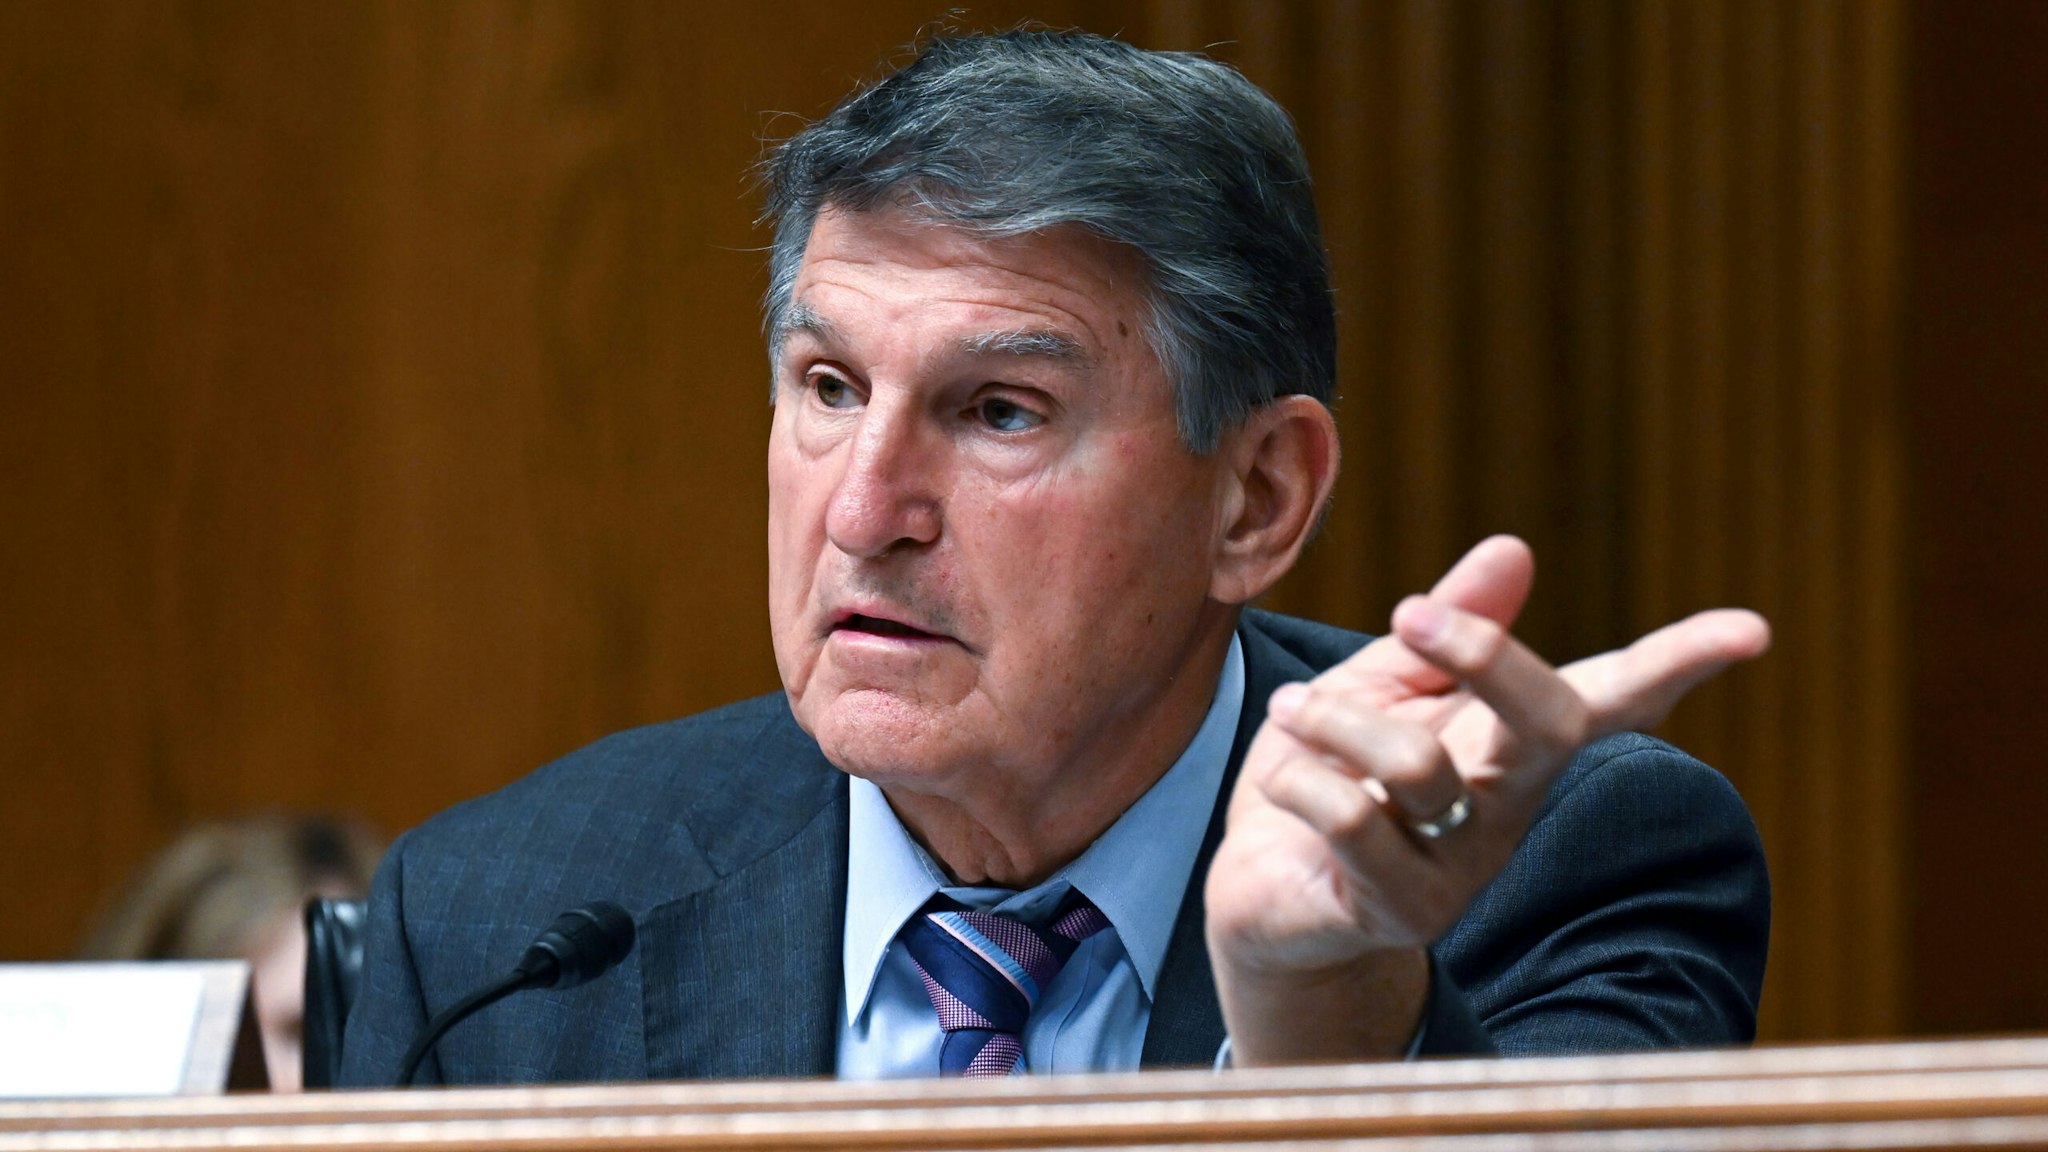 WASHINGTON, DC - SEPTEMBER 19: Senator Joe Manchin (D-WV) speaks to Chairwomen of the Federal Communications Commission Jessica Rosenworcel during a Senate Appropriations Subcommittee on Financial Servieces and General Government Hearings at the Dirksen Senate Office Building on Tuesday September 19, 2023 in Washington, DC.